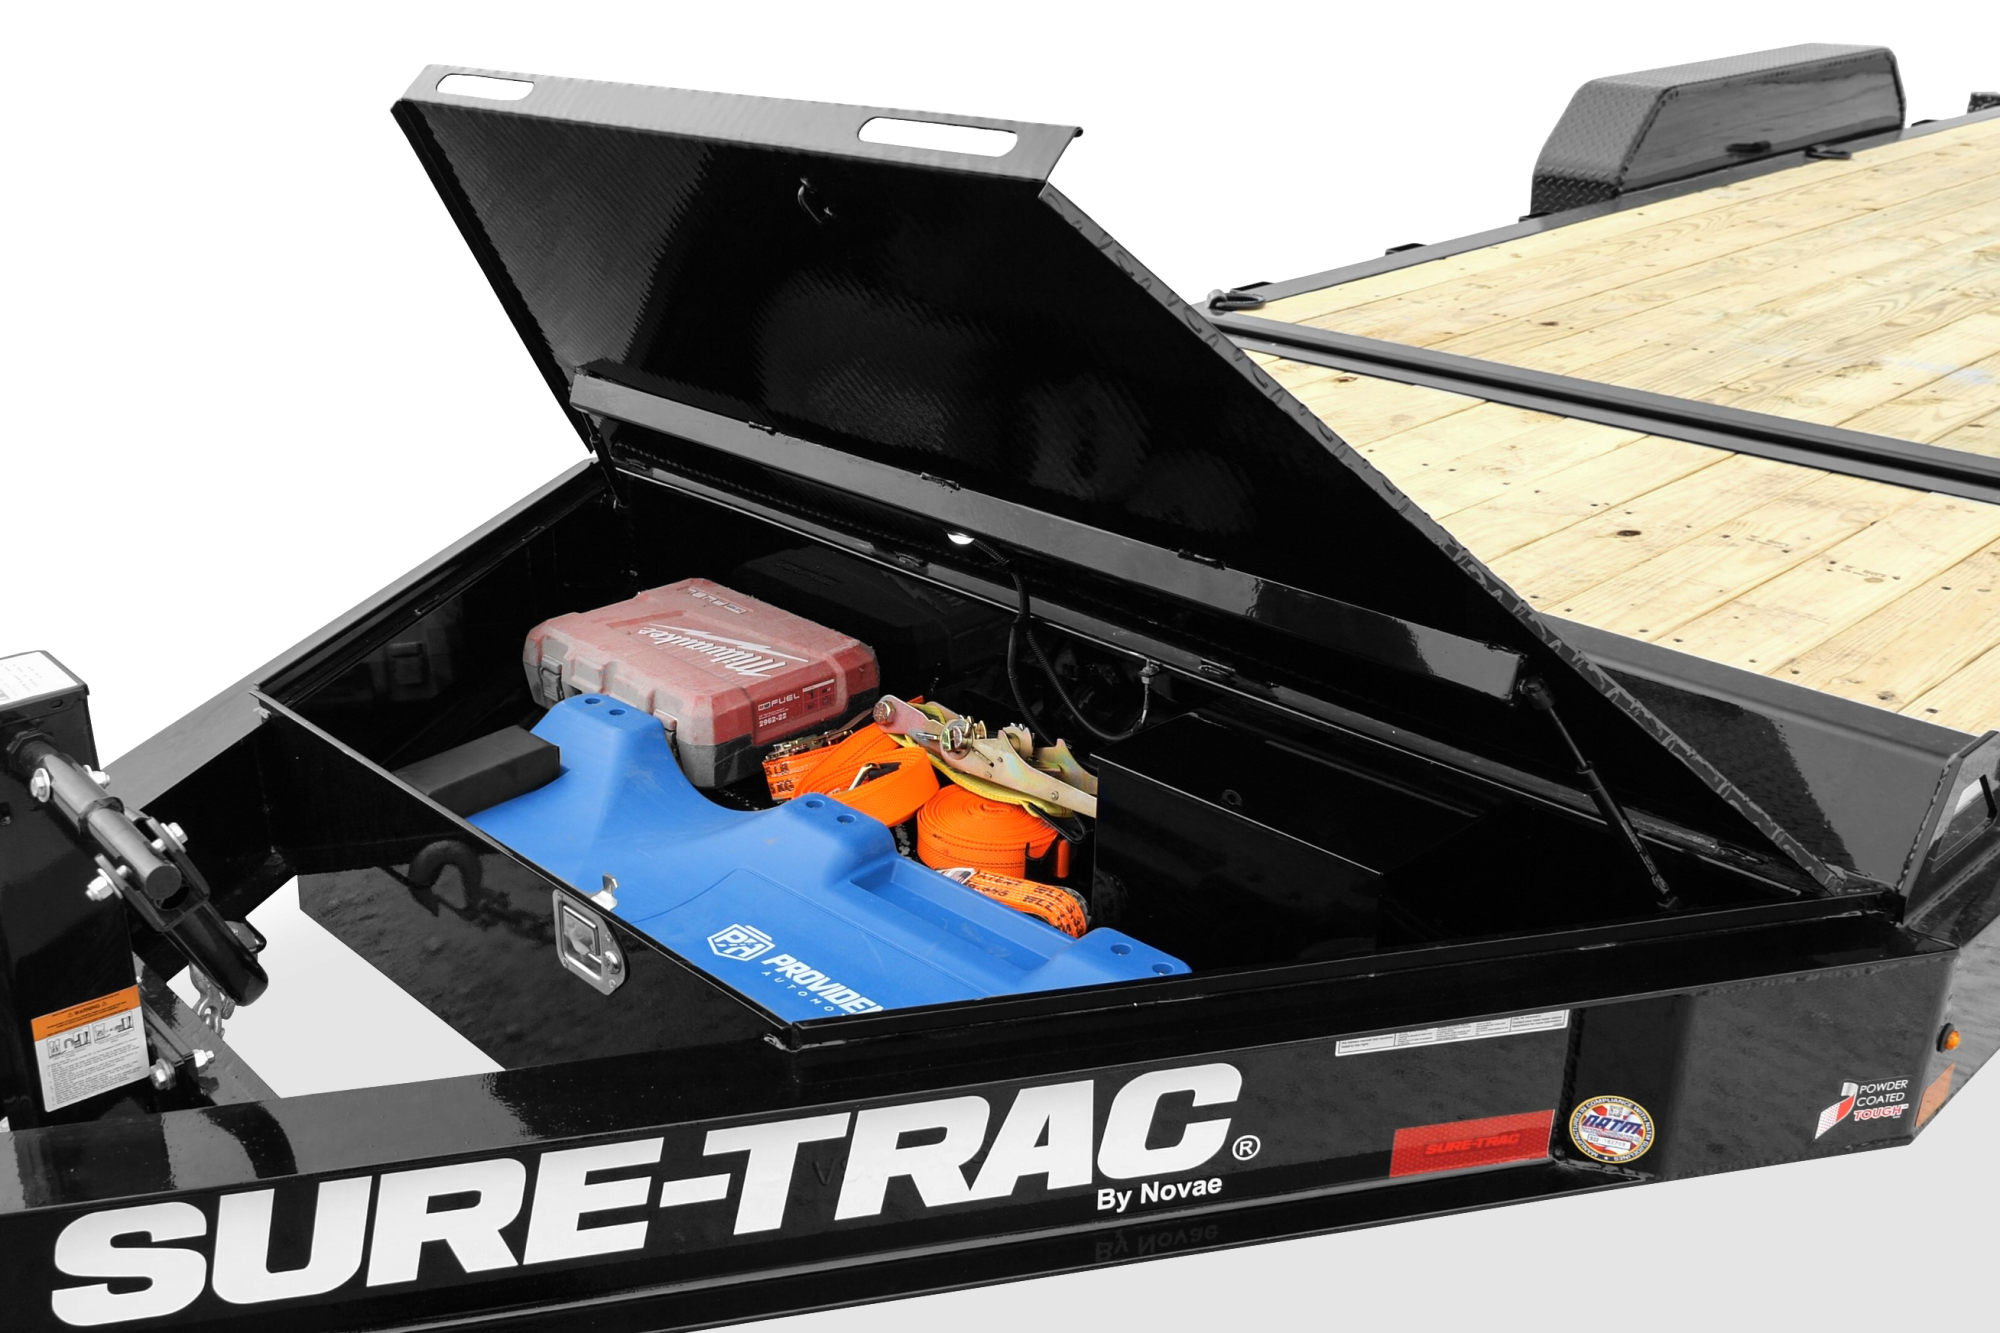 Large Toolbox to carry extra tools and accessories.